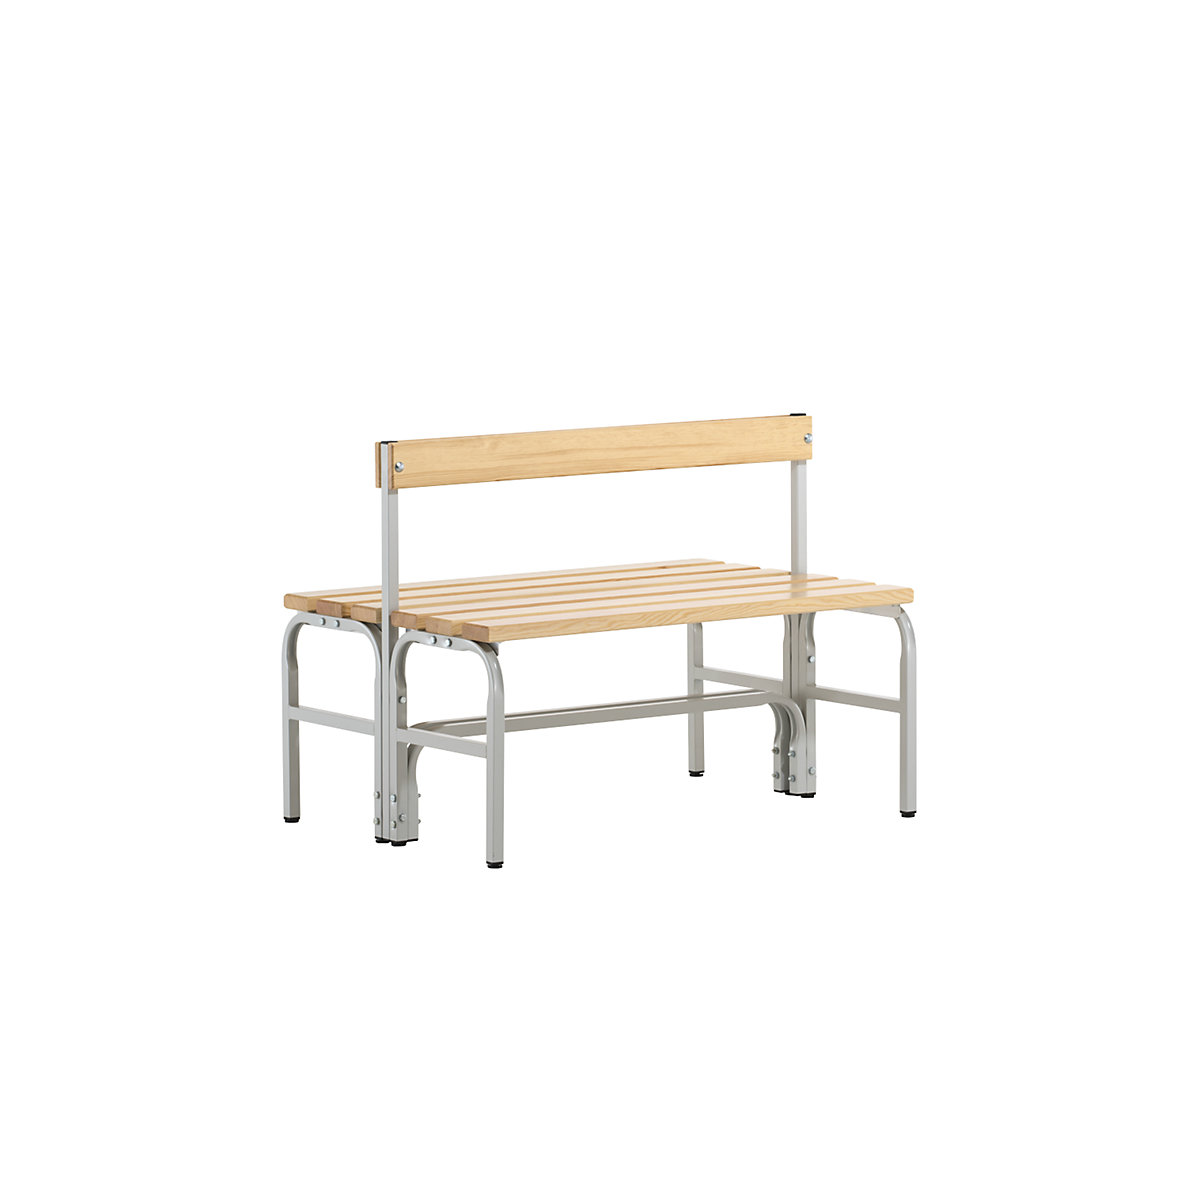 Half height cloakroom bench with back rest, double sided – Sypro, pine wood slats, length 1015 mm, light grey-3